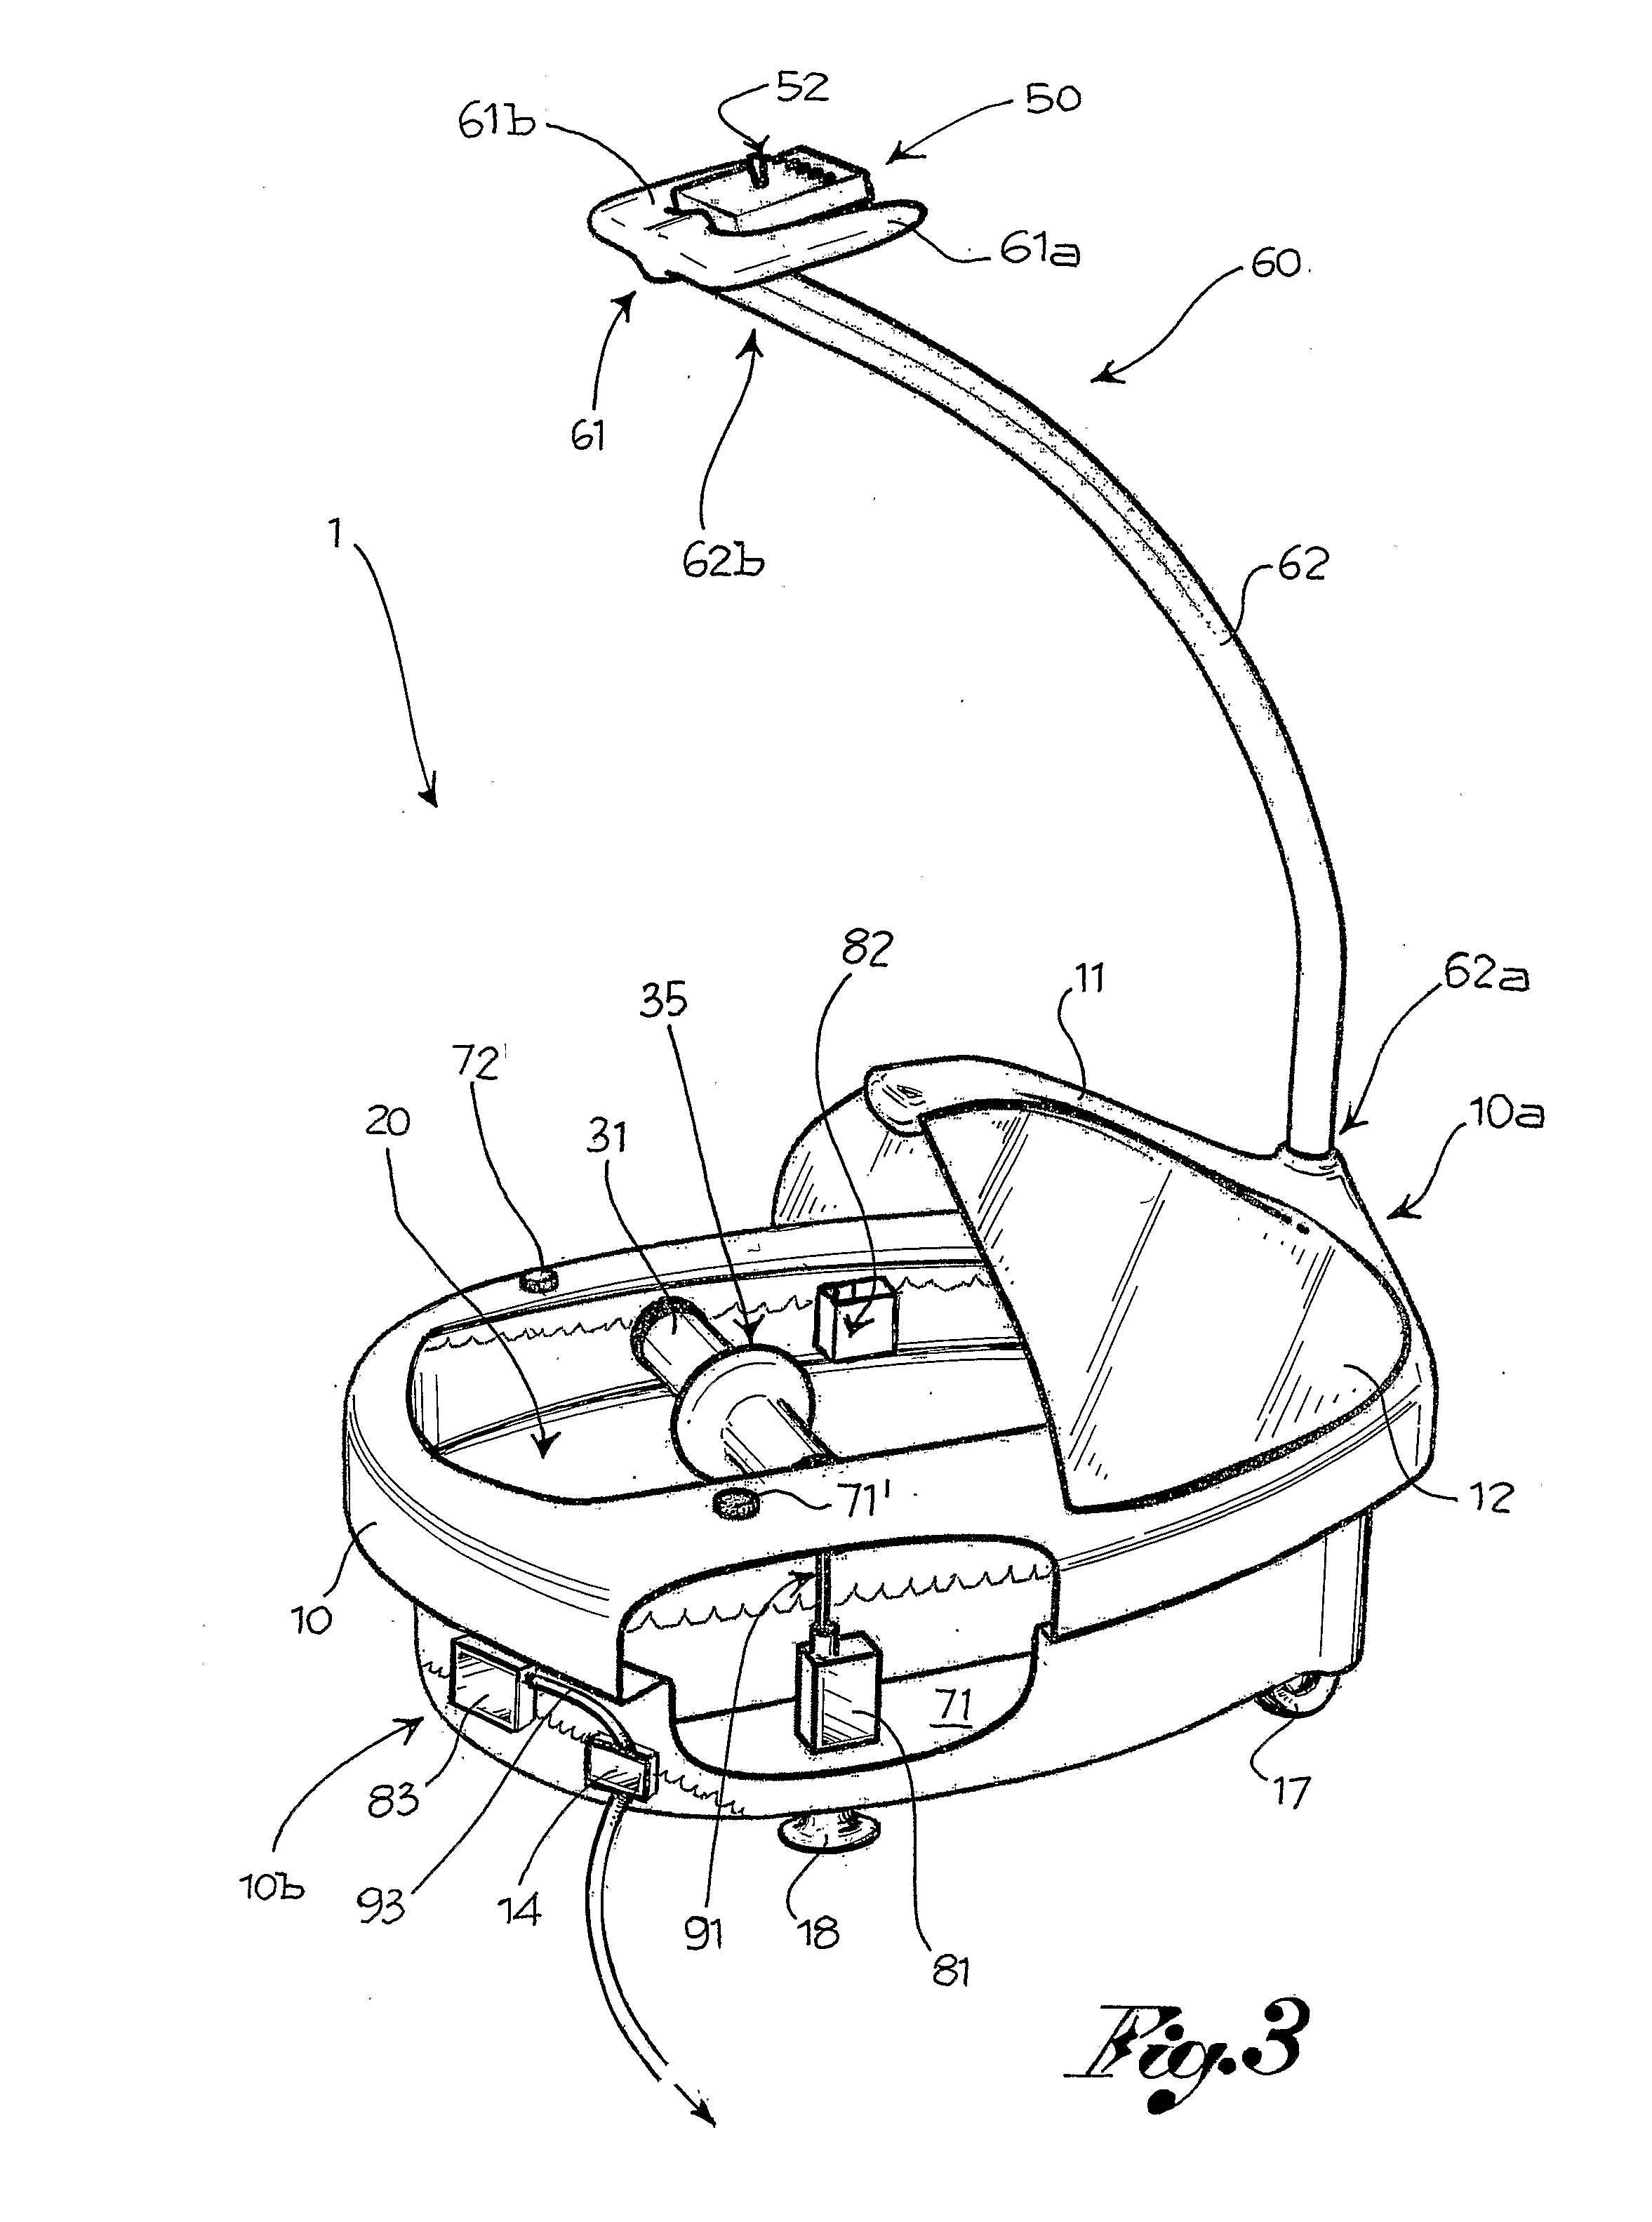 Automatic Apparatus for Washing Feet